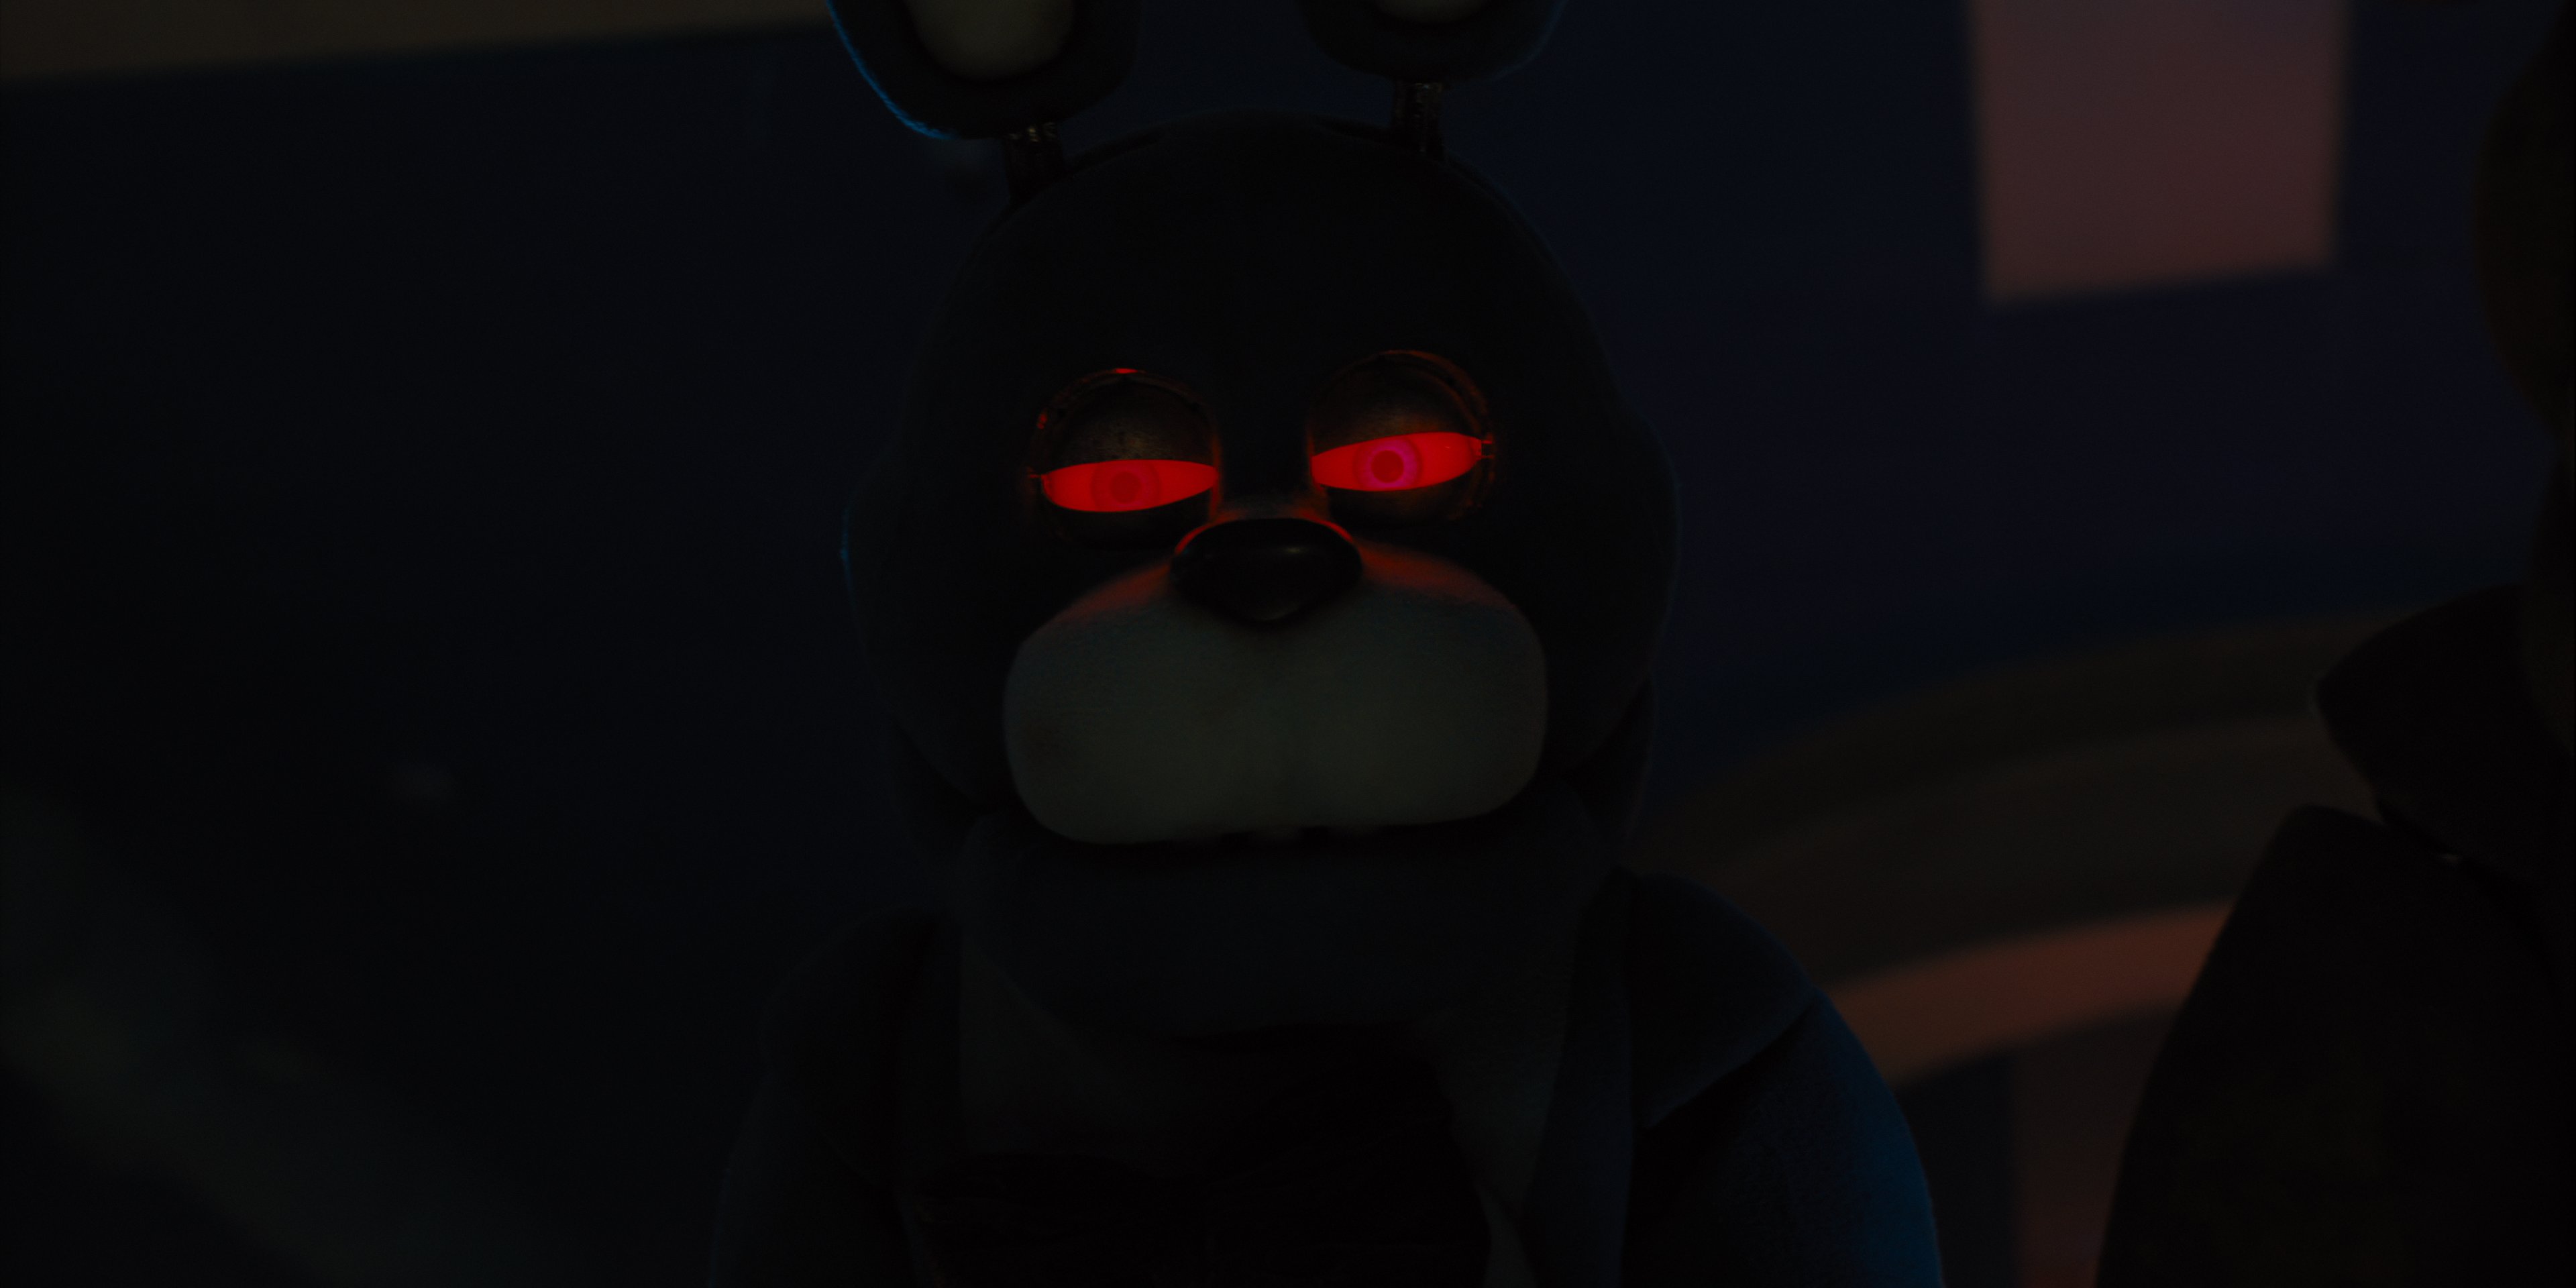 Five Nights at Freddy's Trailer 2 (2023) 